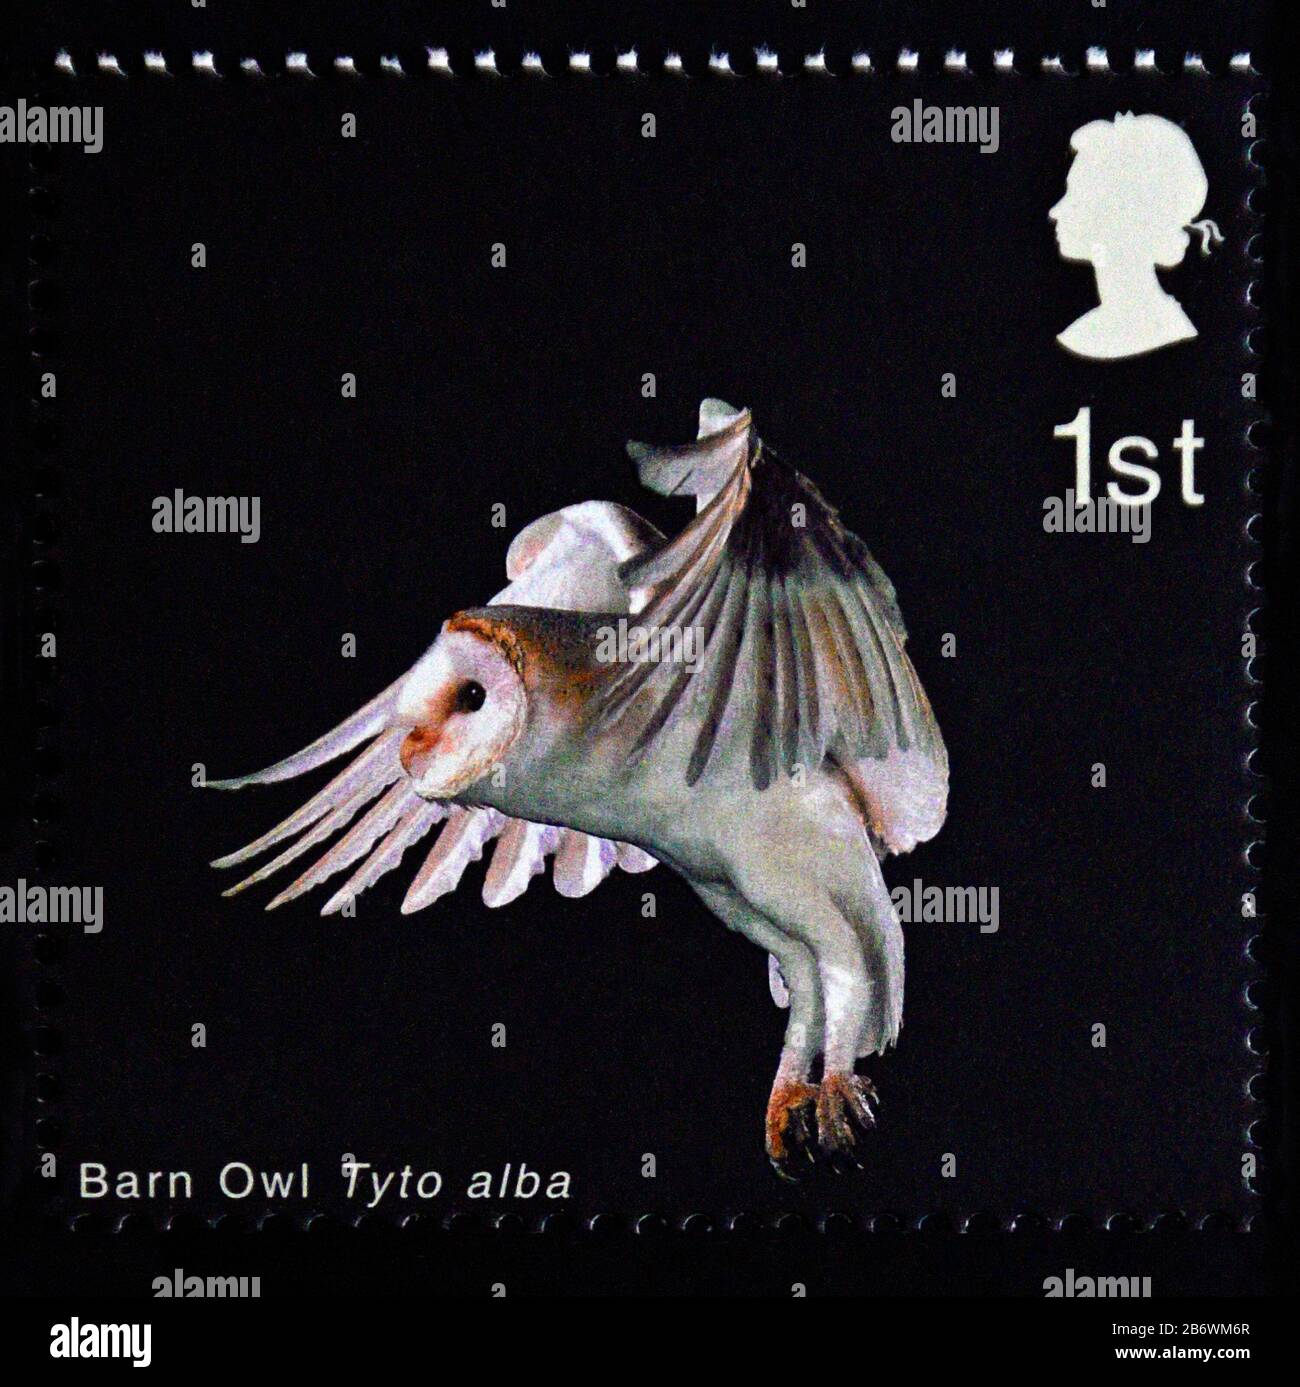 Postage stamp. Great Britain. Queen Elizabeth II. Birds of Prey. Barn Owl. Barn Owl with Folded Wings and Legs  down. 1st. 2003. Stock Photo